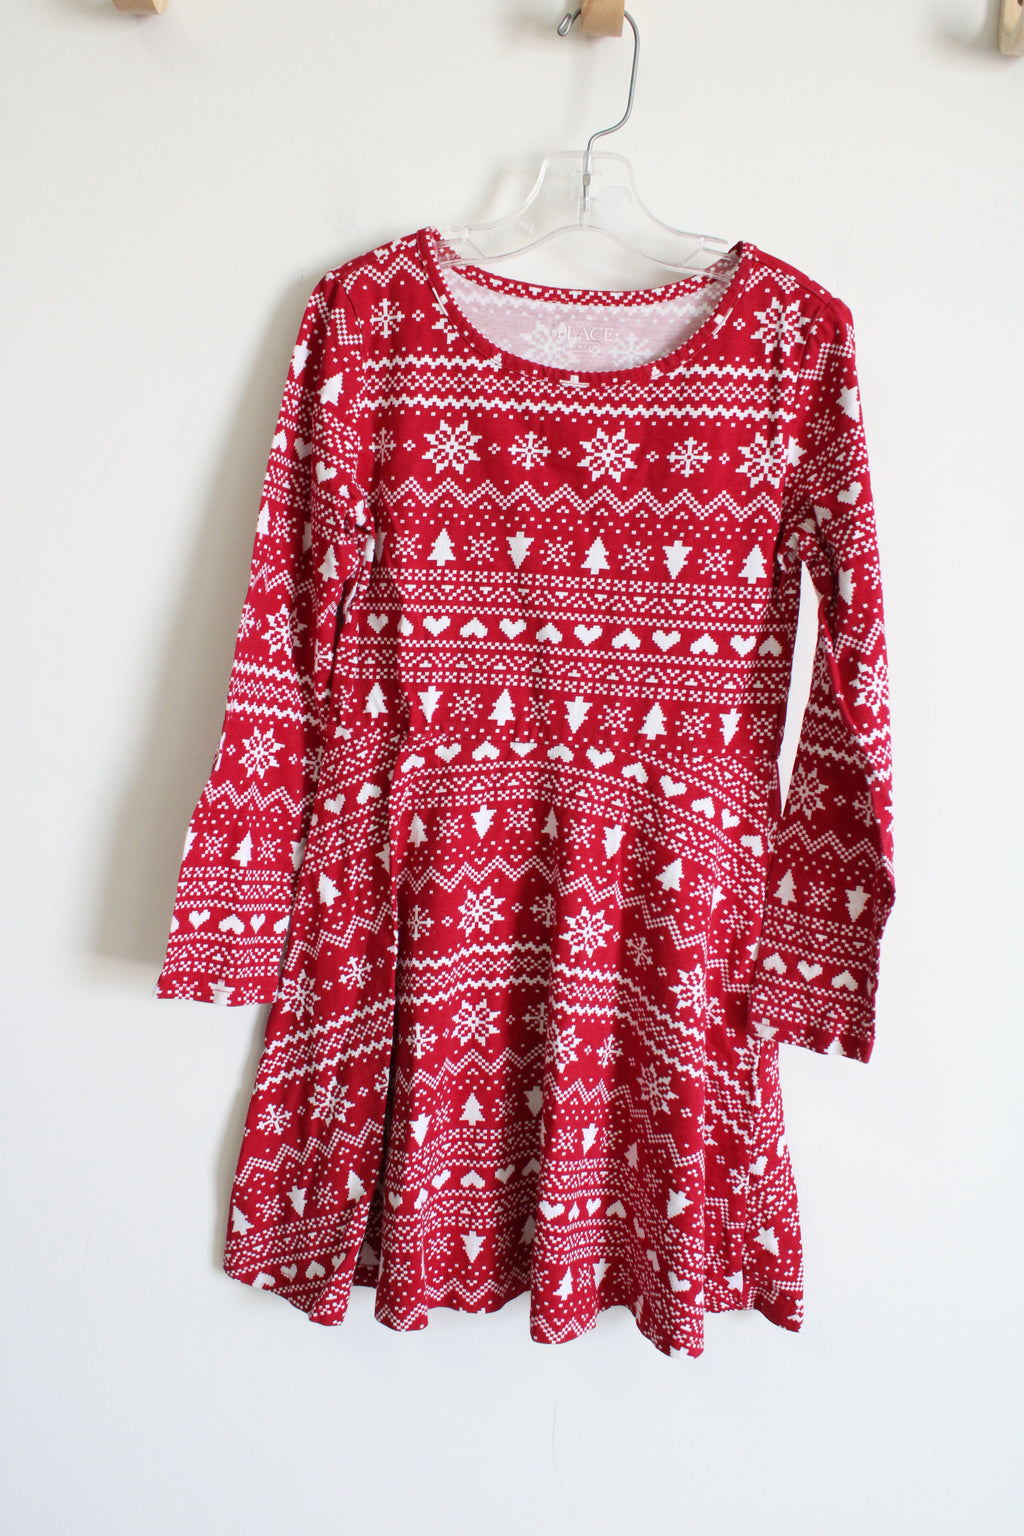 Children's Place Red Christmas Dress | 7/8